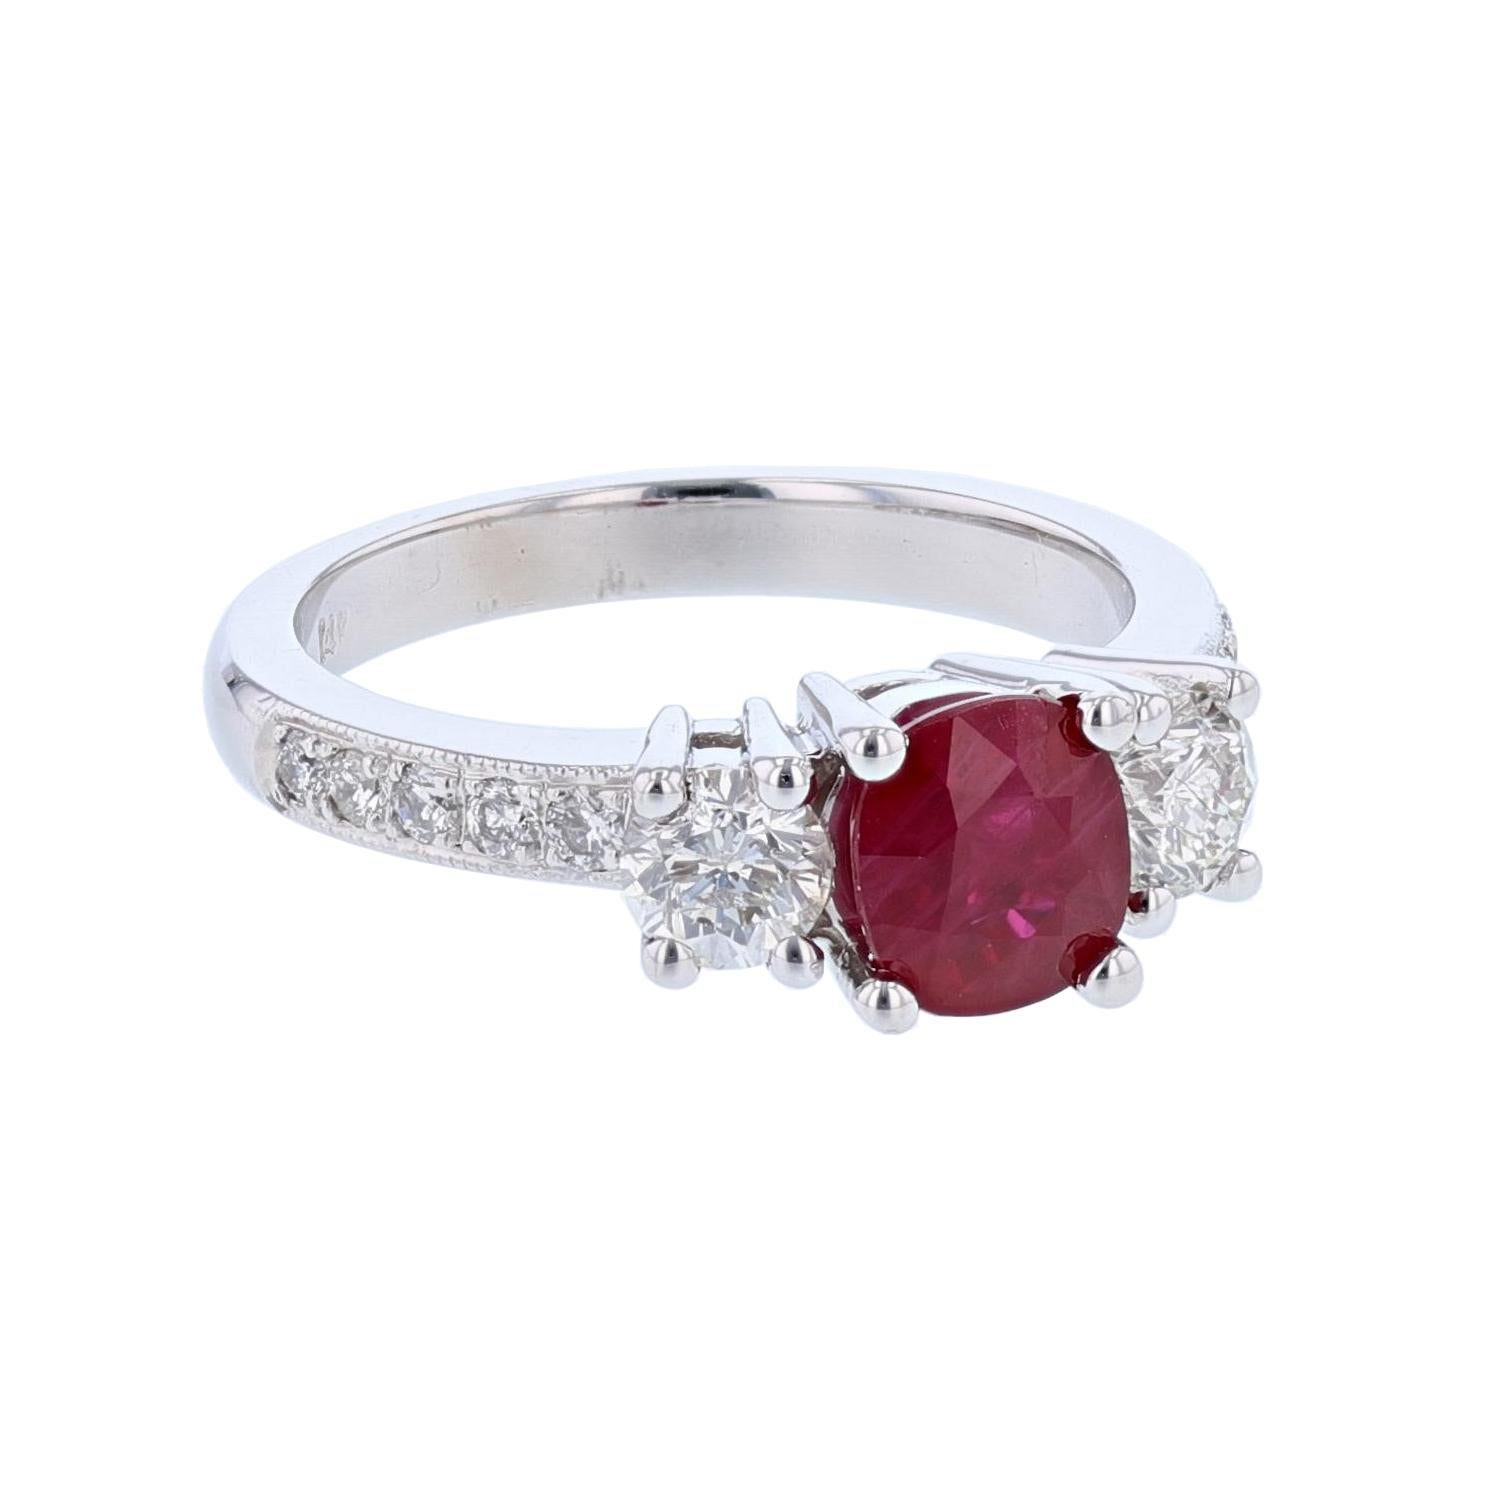 This ring is made in 14k white gold and features a Cushion cut Ruby weighing 1.36ct. The ring also features 2 prong set, round cut diamonds weighing 0.63cts  with a color grade (H) and clarity grade (SI2) and 10 round cut diamonds weighing 0.18cts